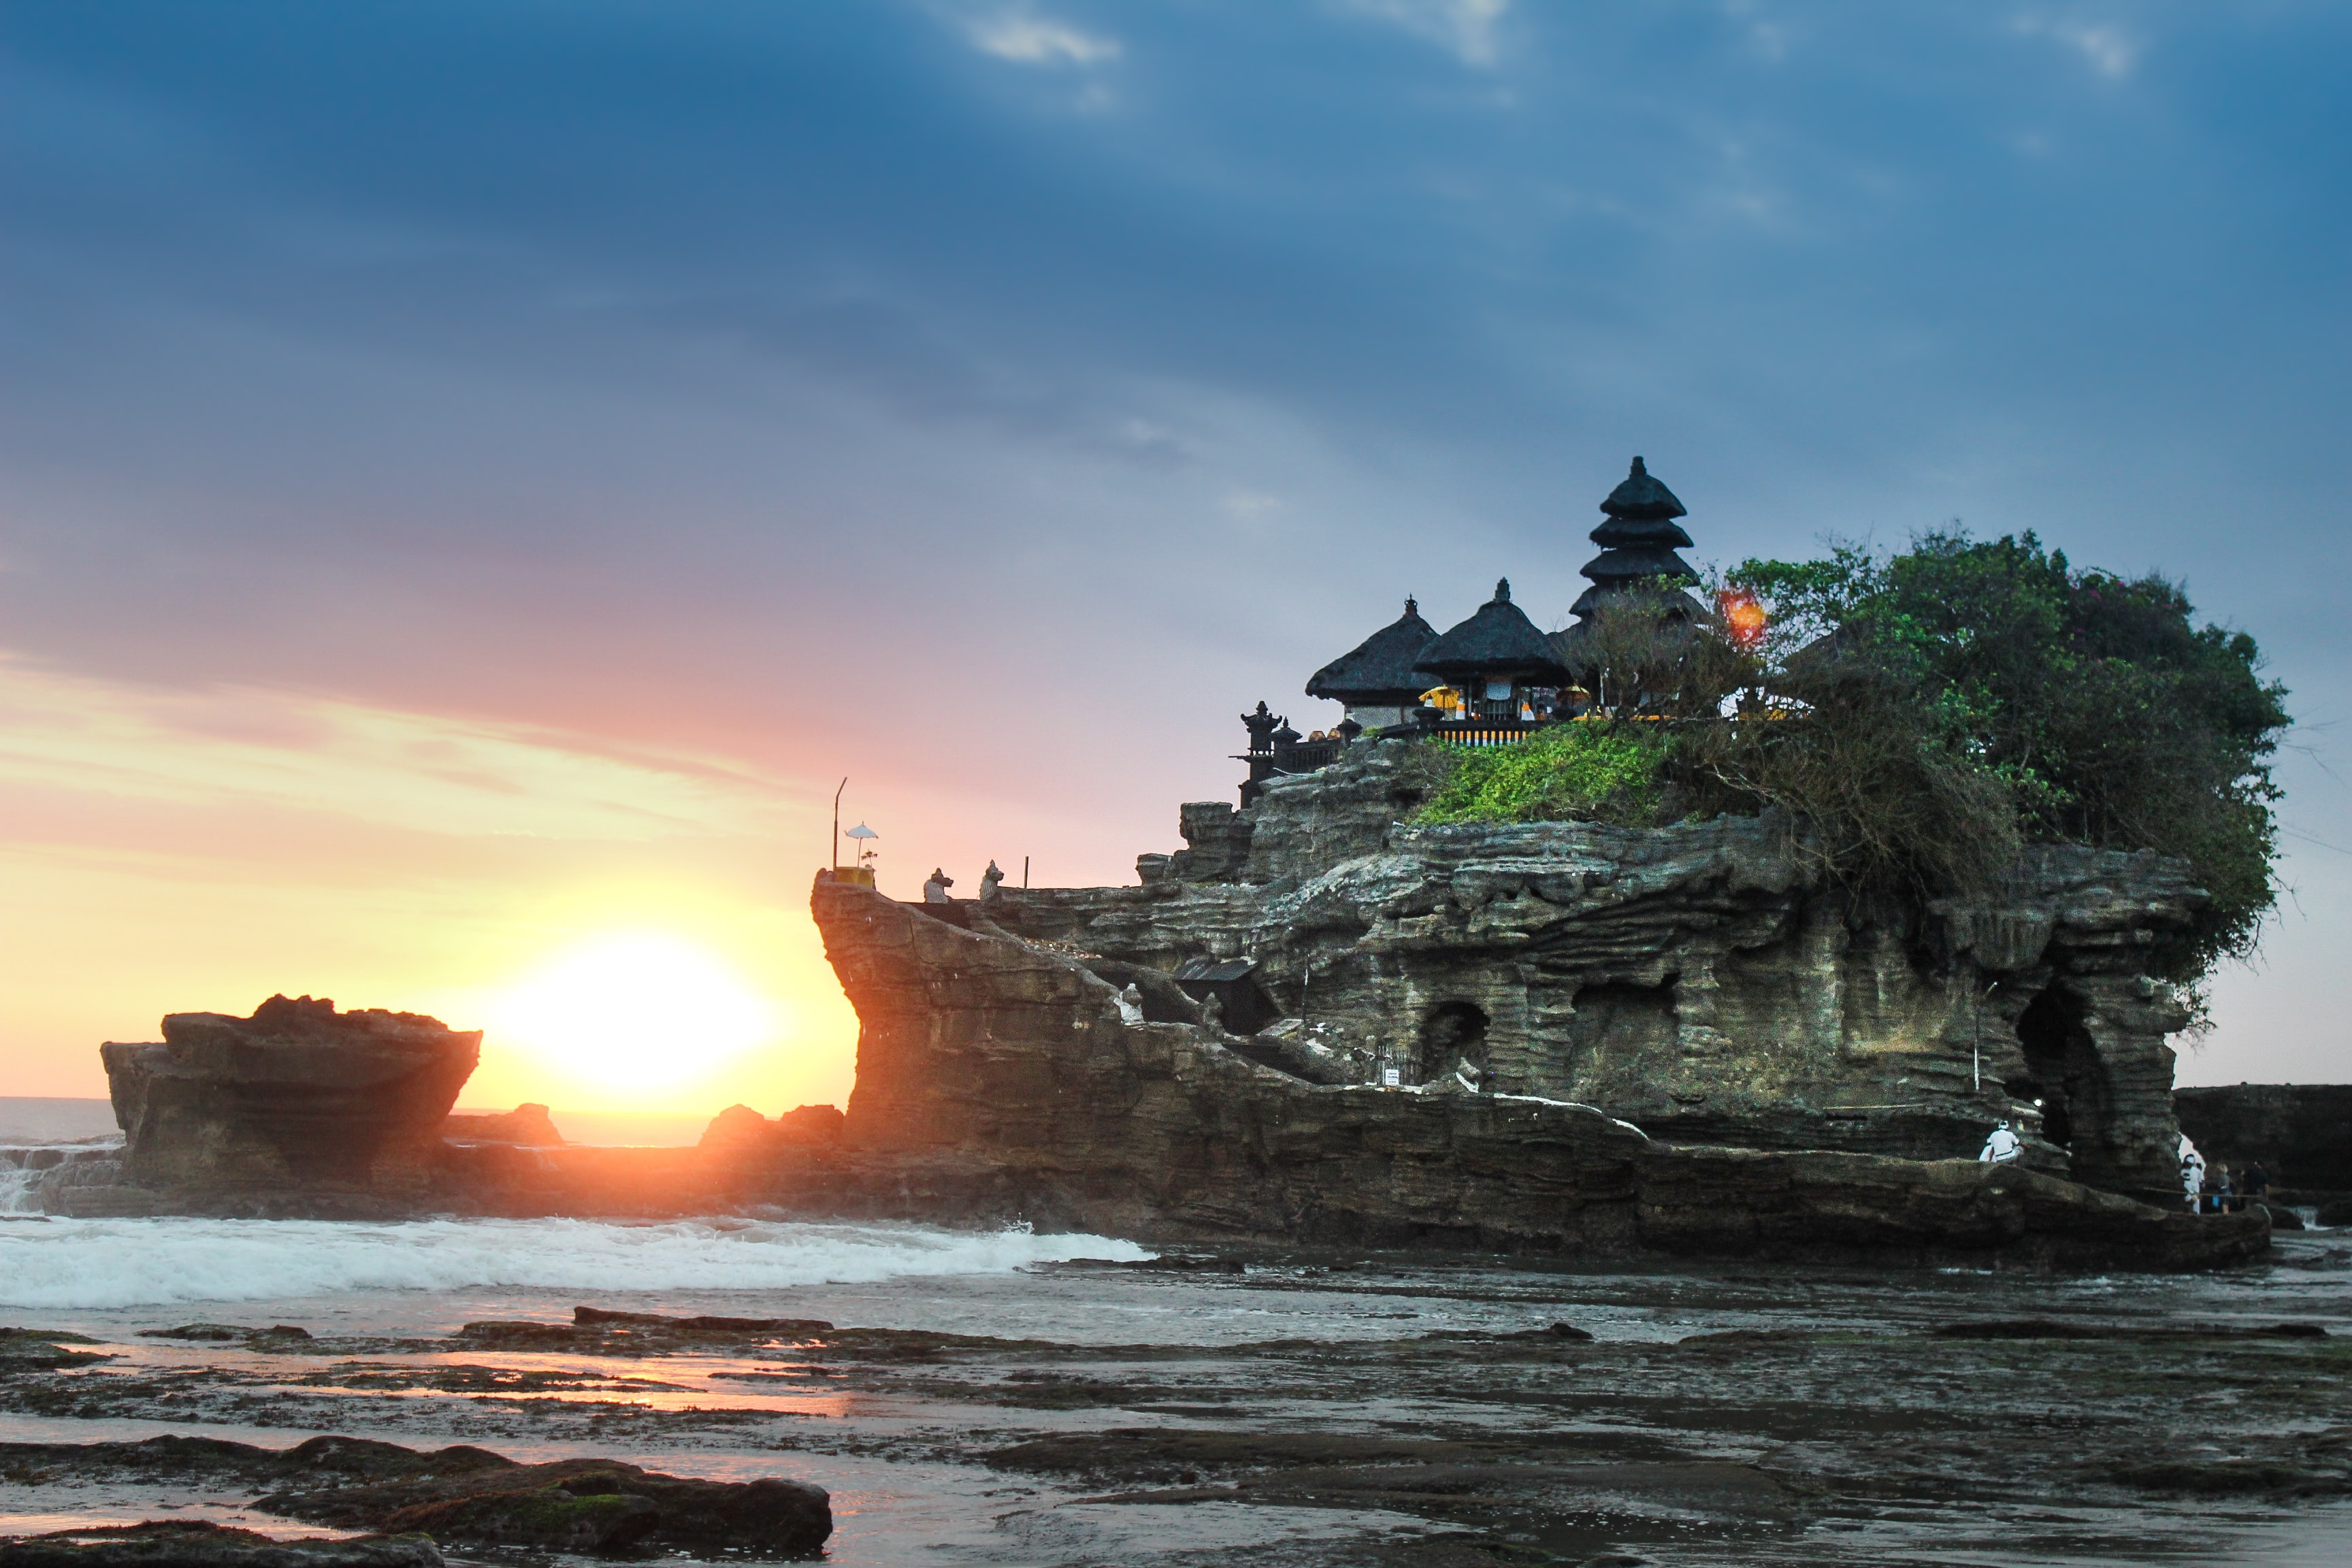 Cottages in Bali